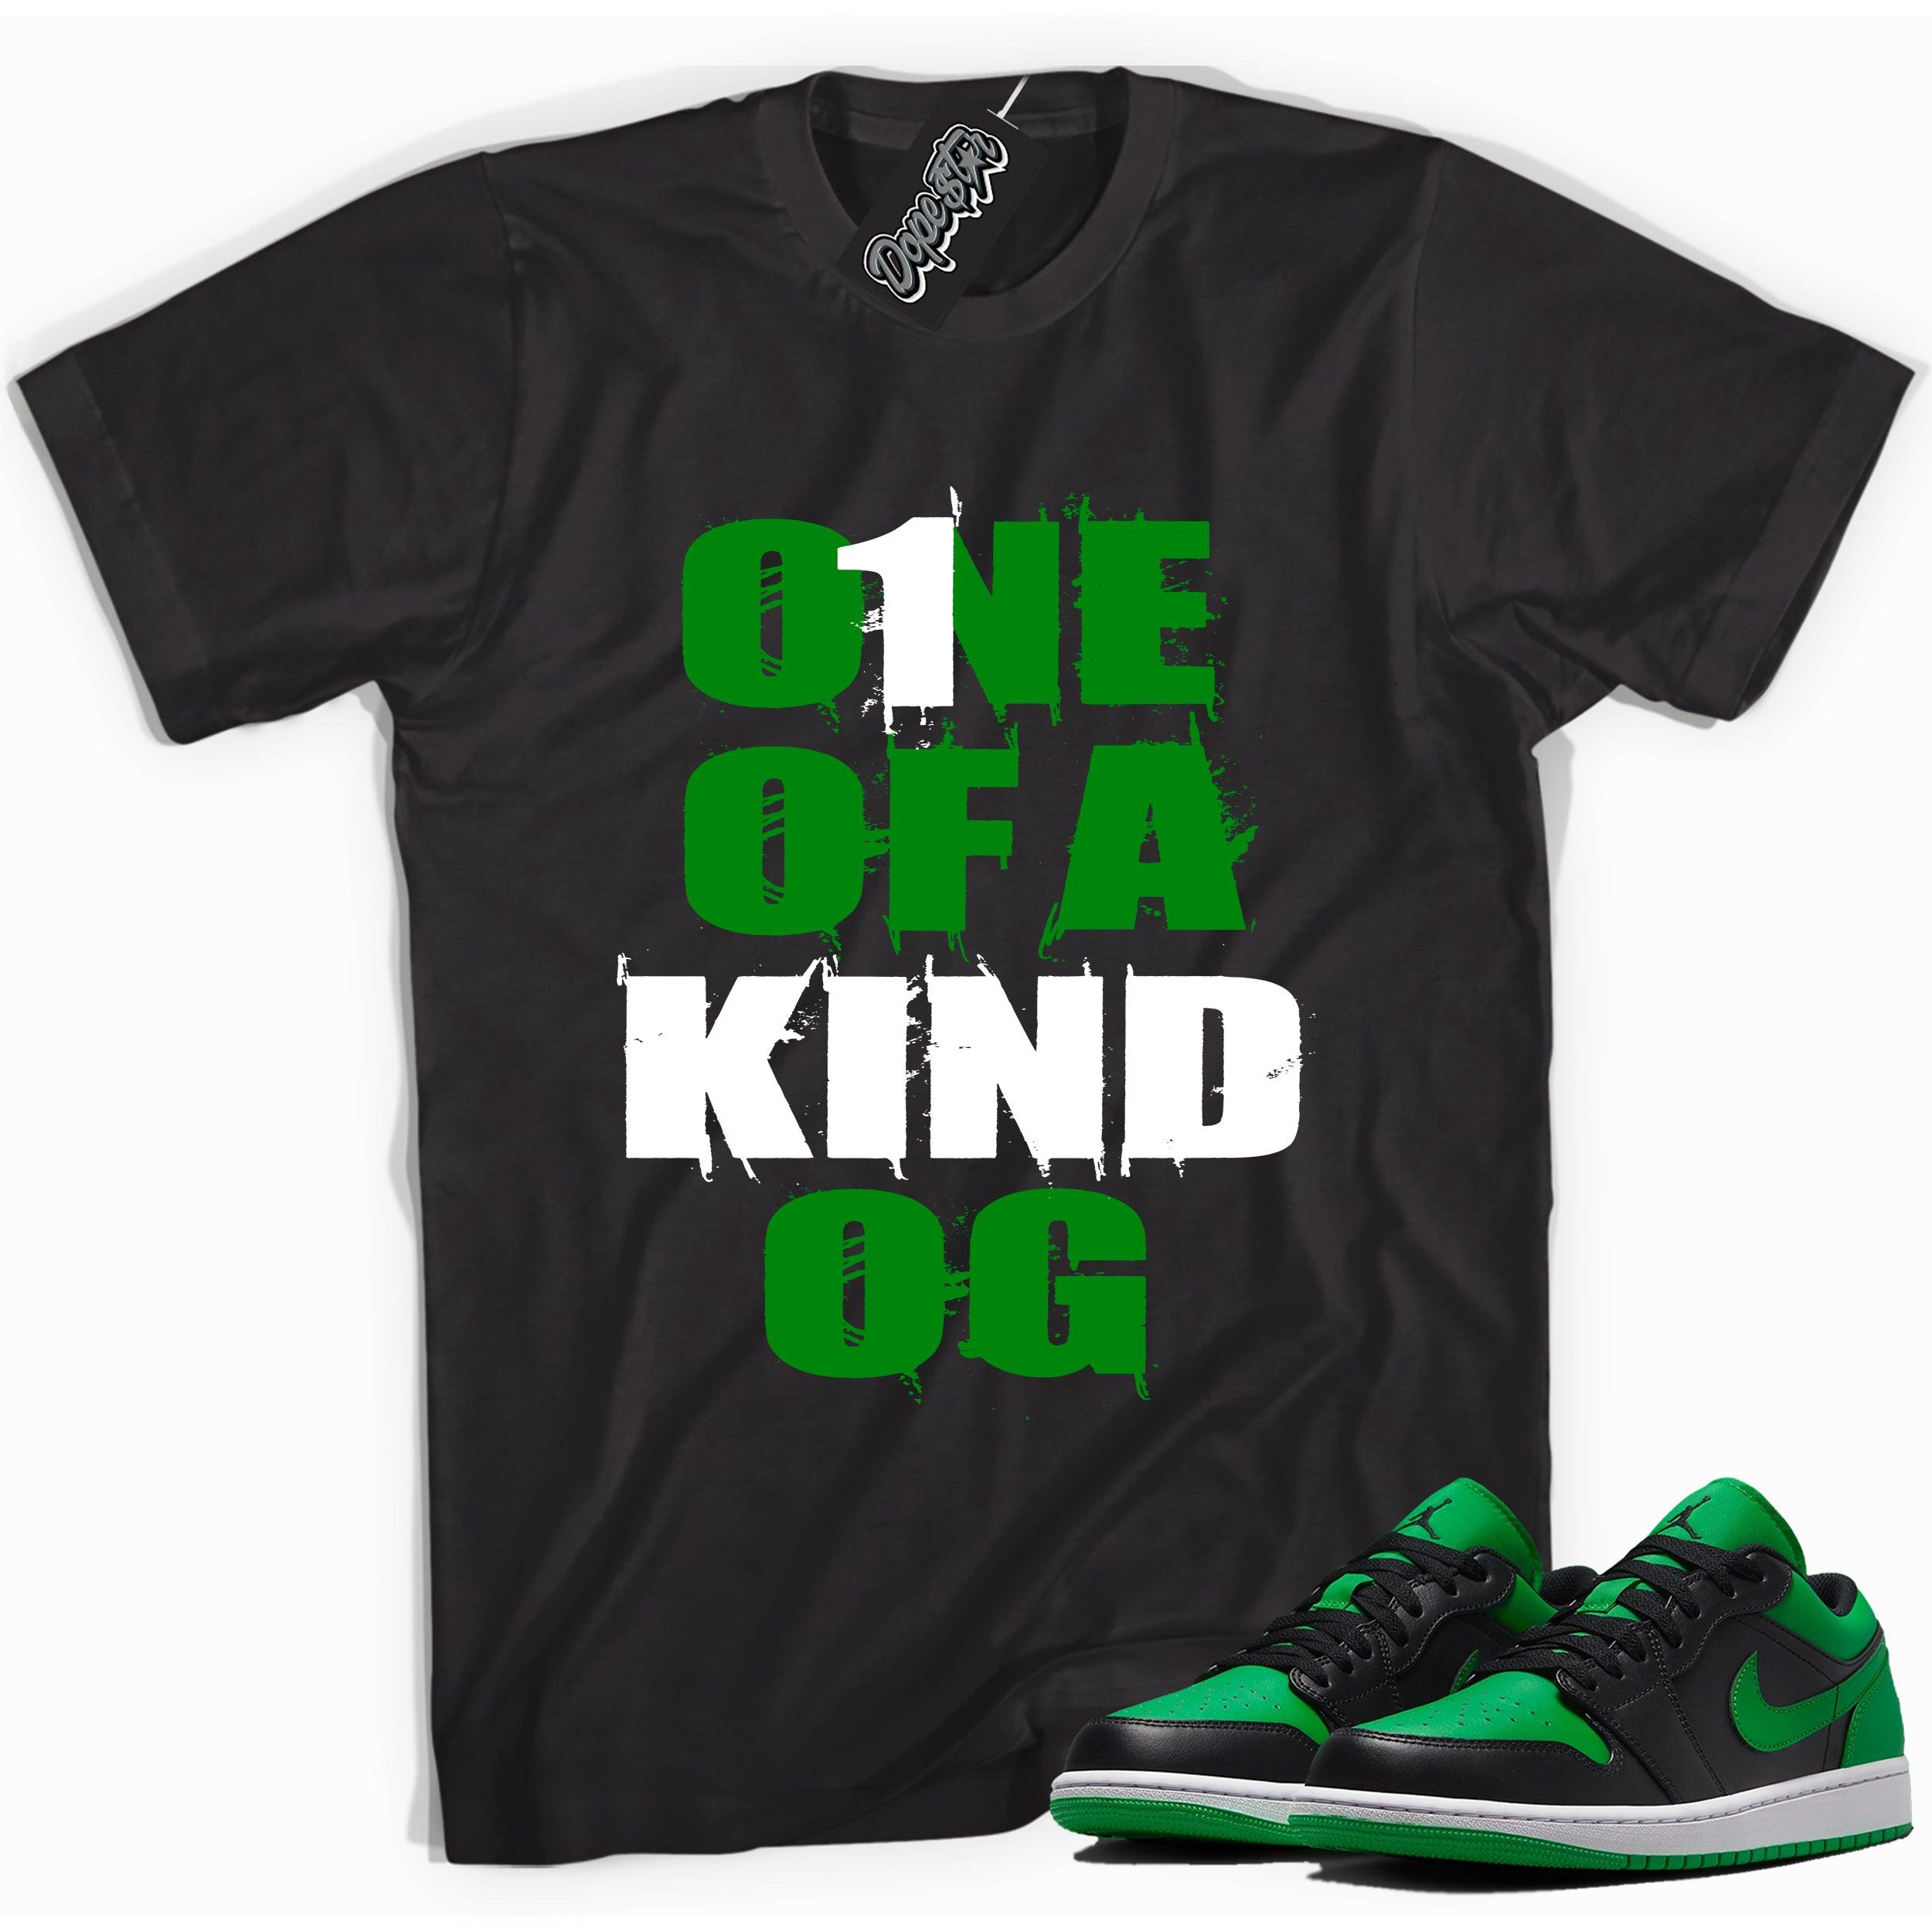 Cool black graphic tee with 'one of a kind' print, that perfectly matches Air Jordan 1 Low Lucky Green sneakers